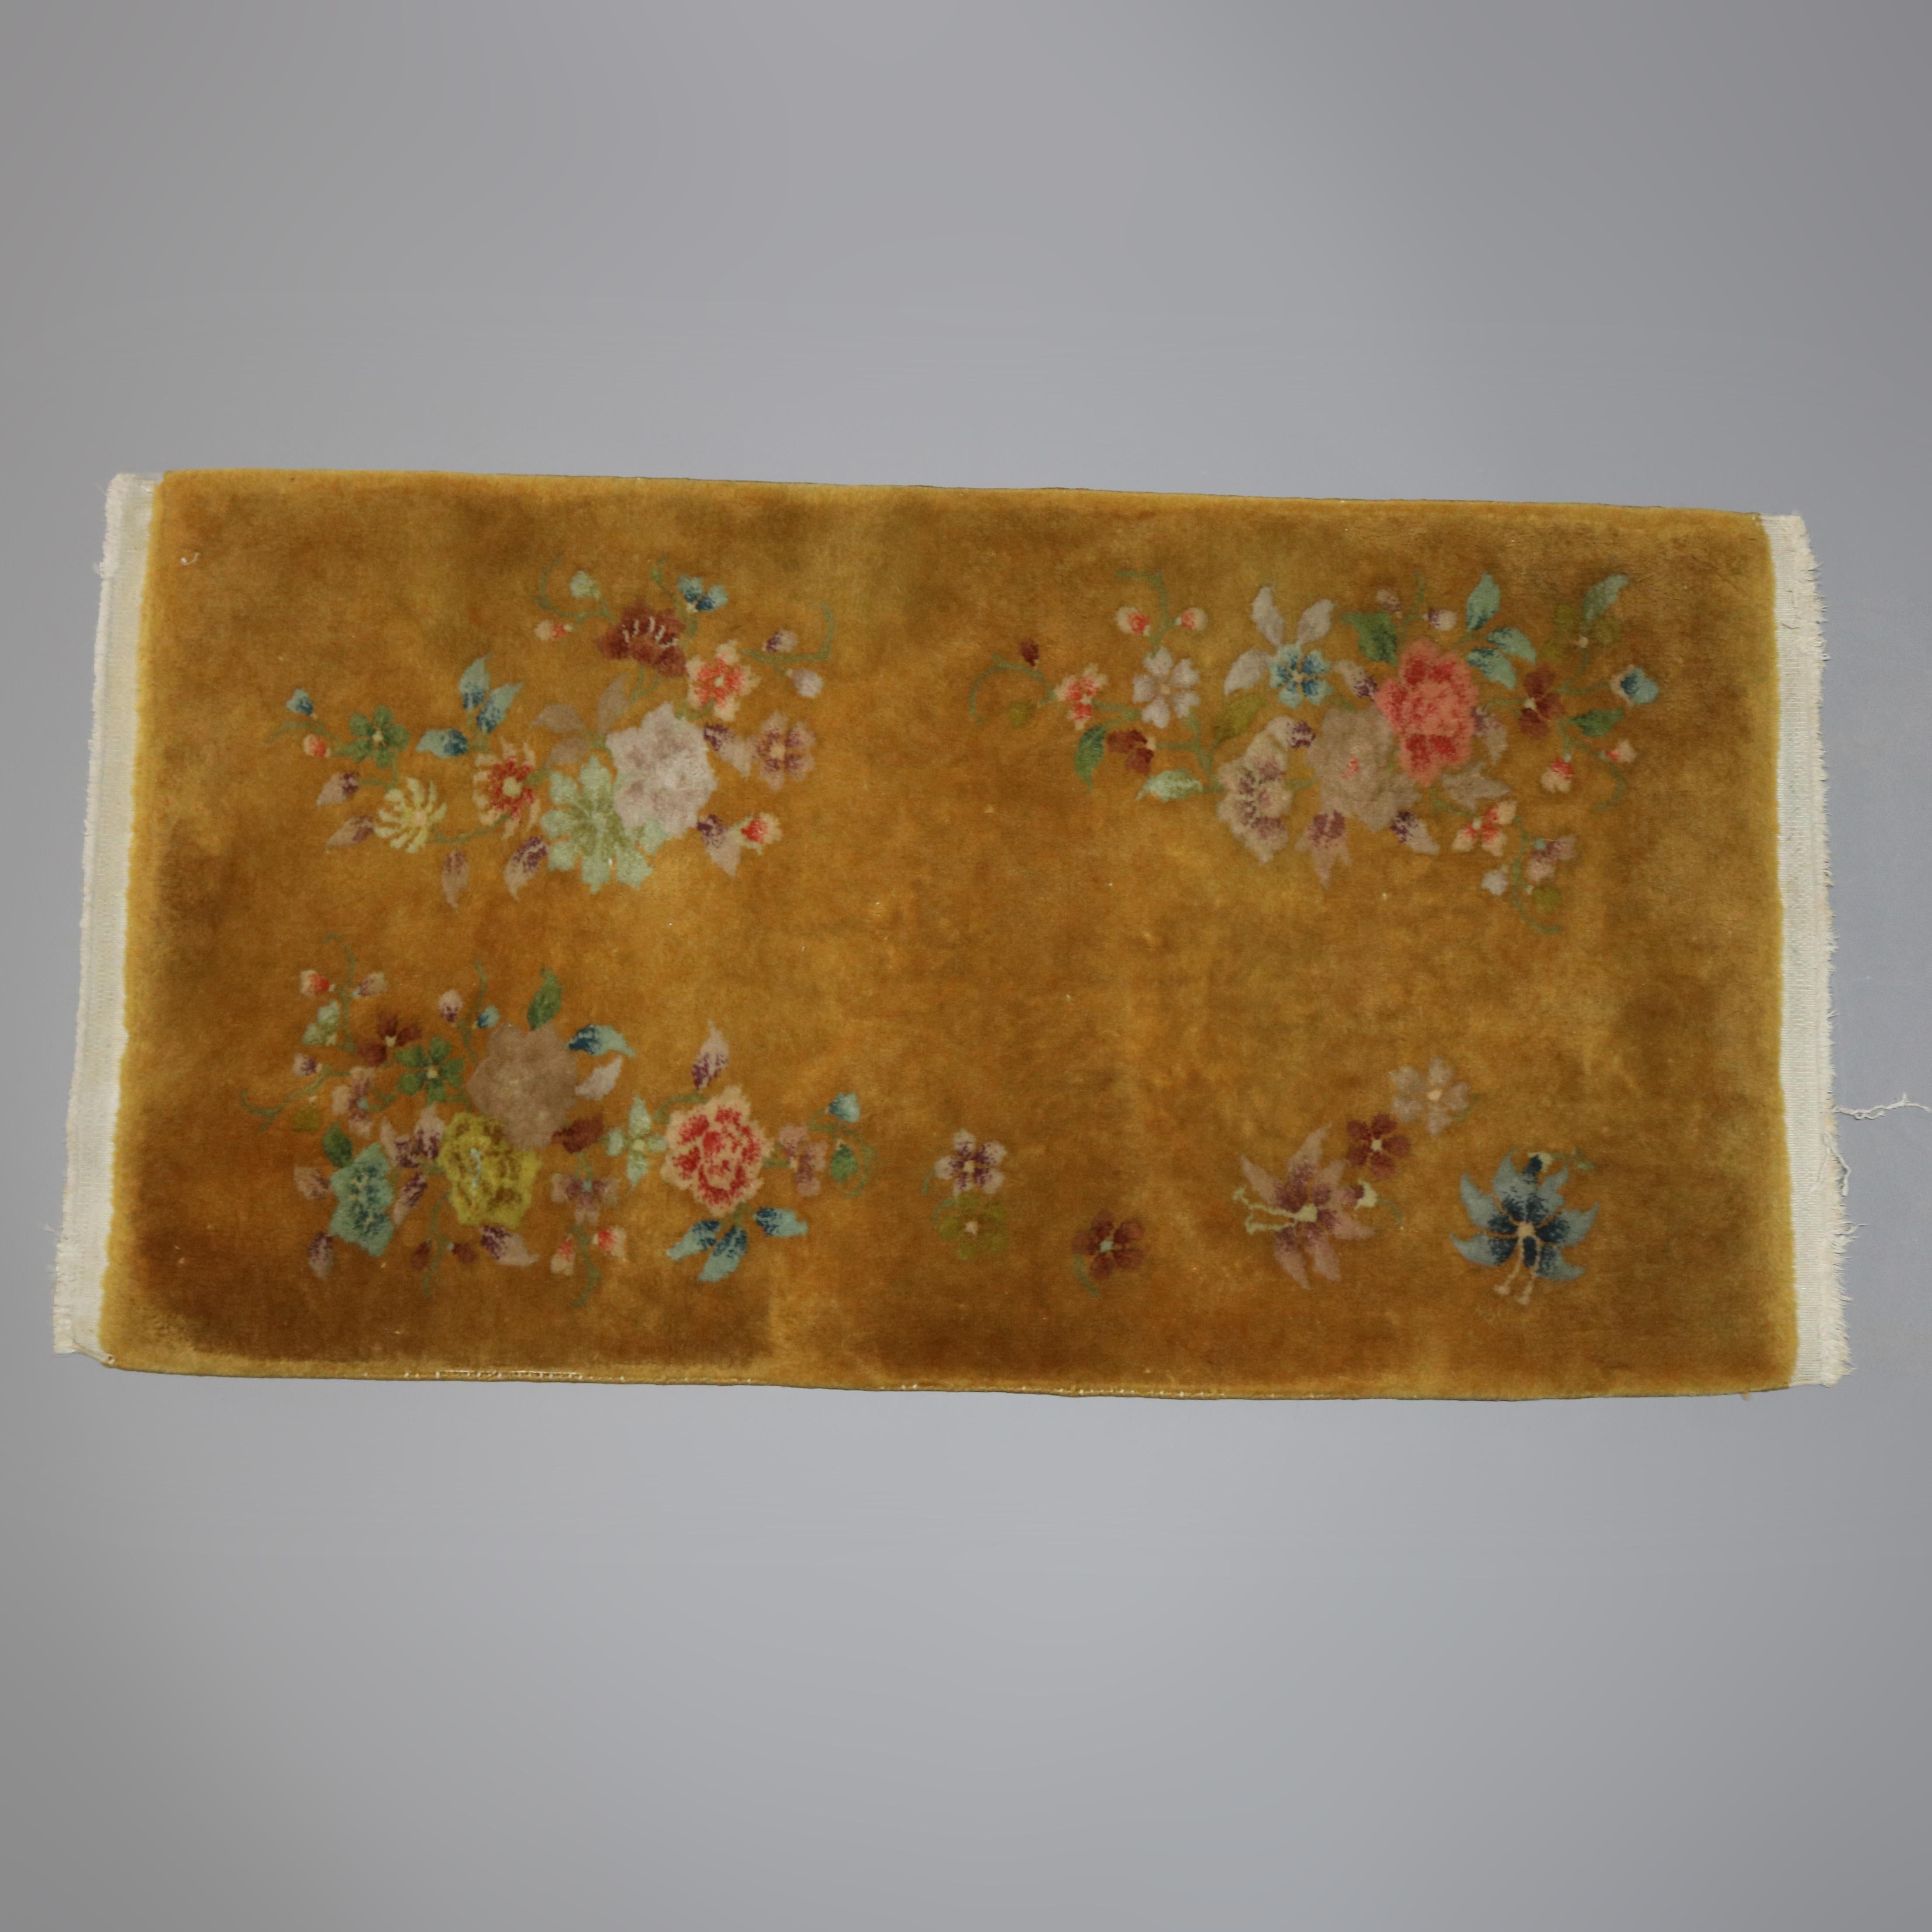 An antique Chinese Nichols style area rug offers wool construction with detached floral spray on gold ground, circa 1920

Measures: 27.5